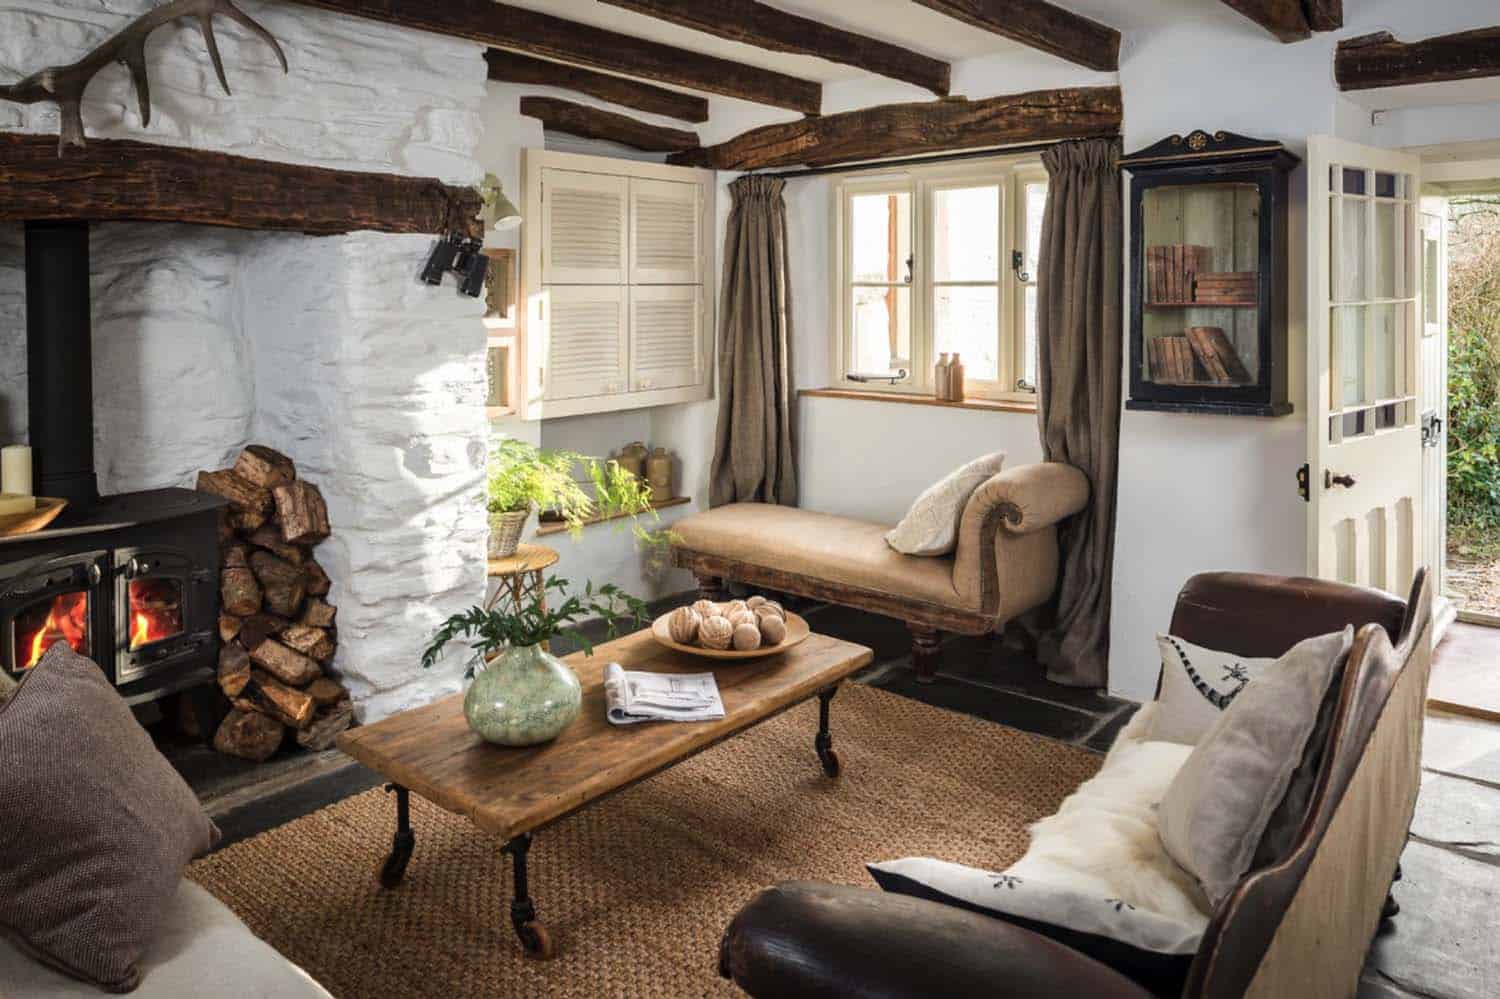 Charming English cottage offers a fairytale getaway